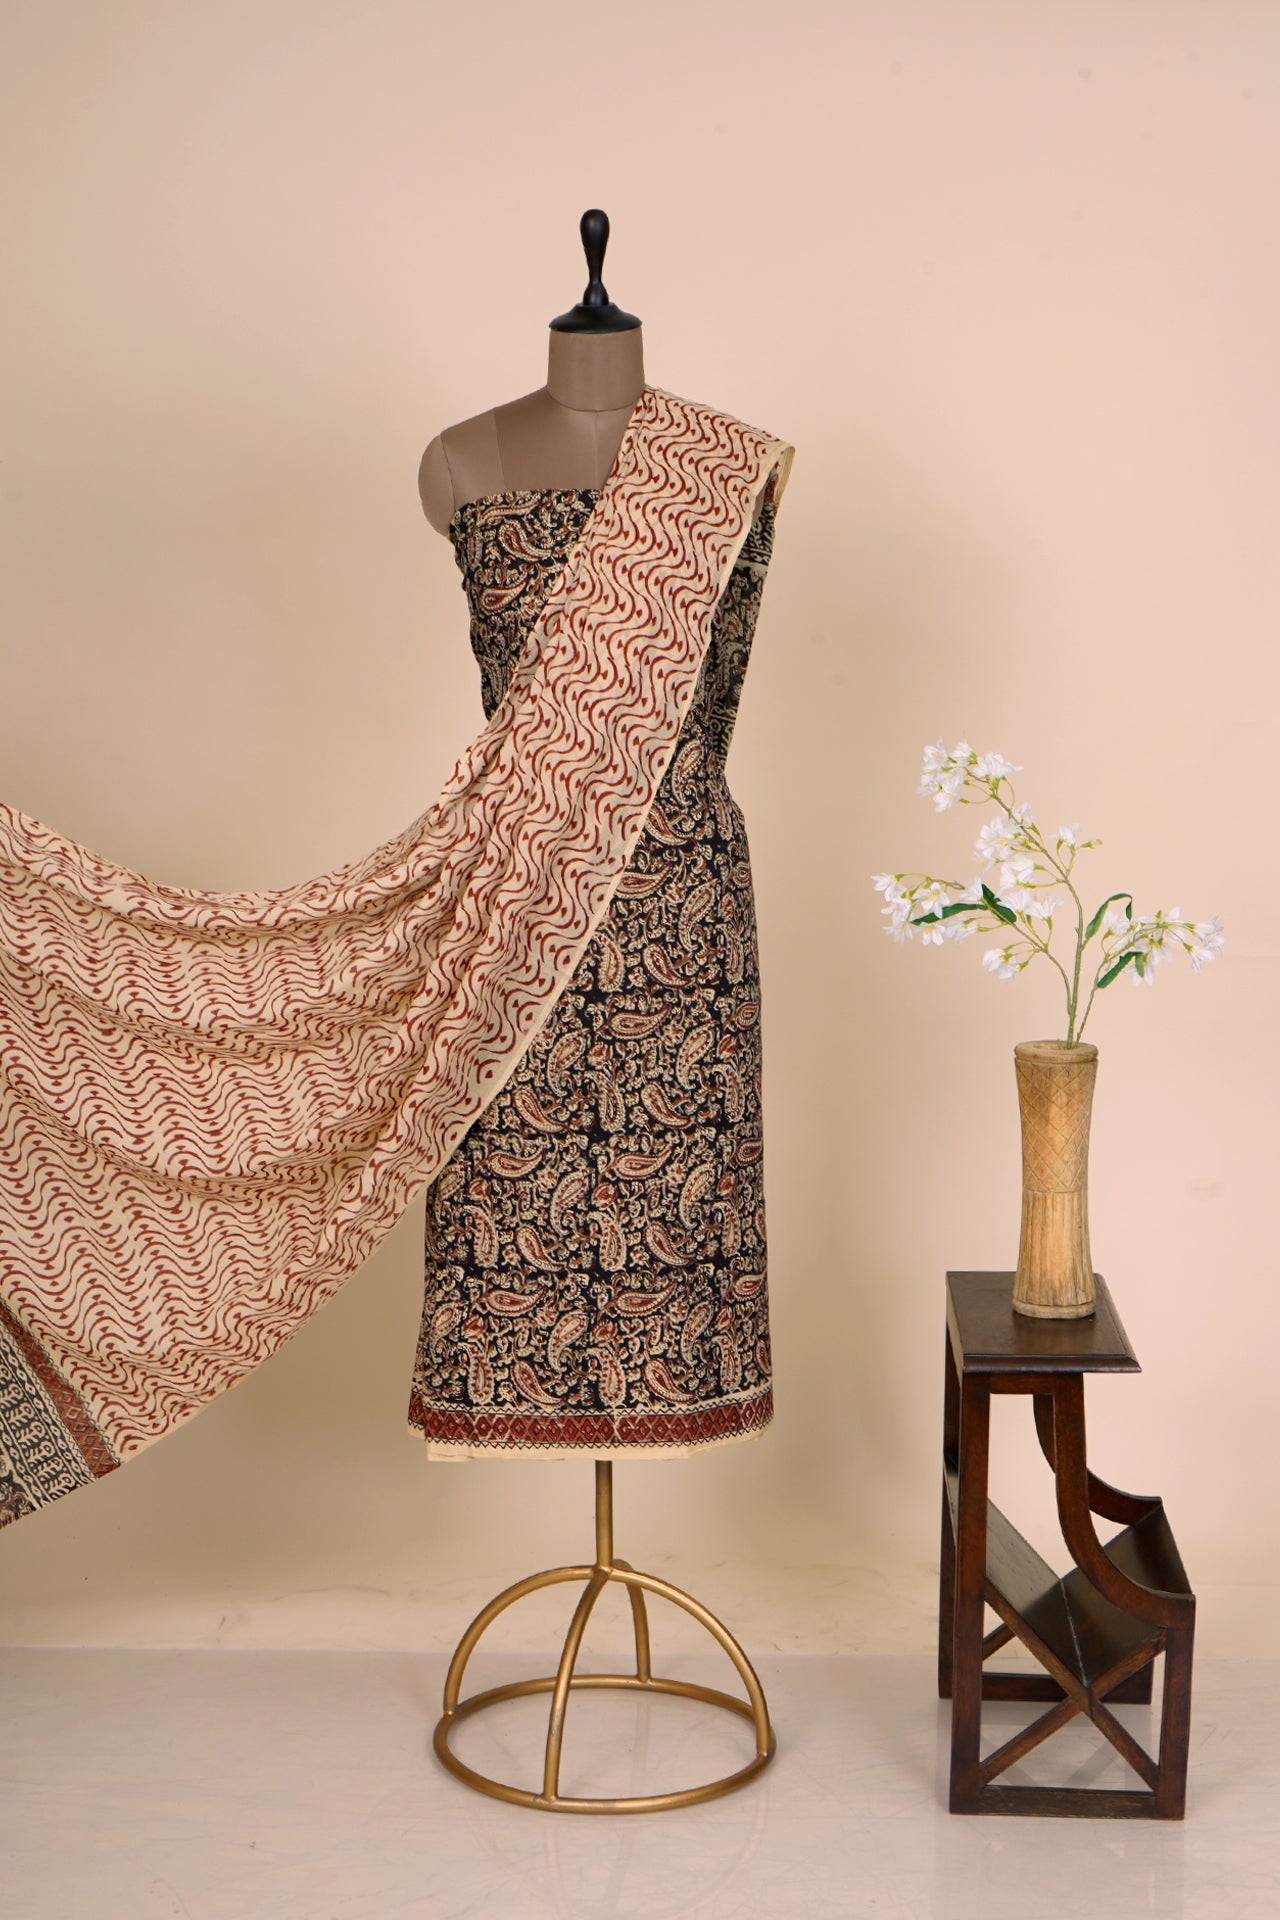 Beige-Rust Color Handcrafted Block Printed Cotton Suit Sets